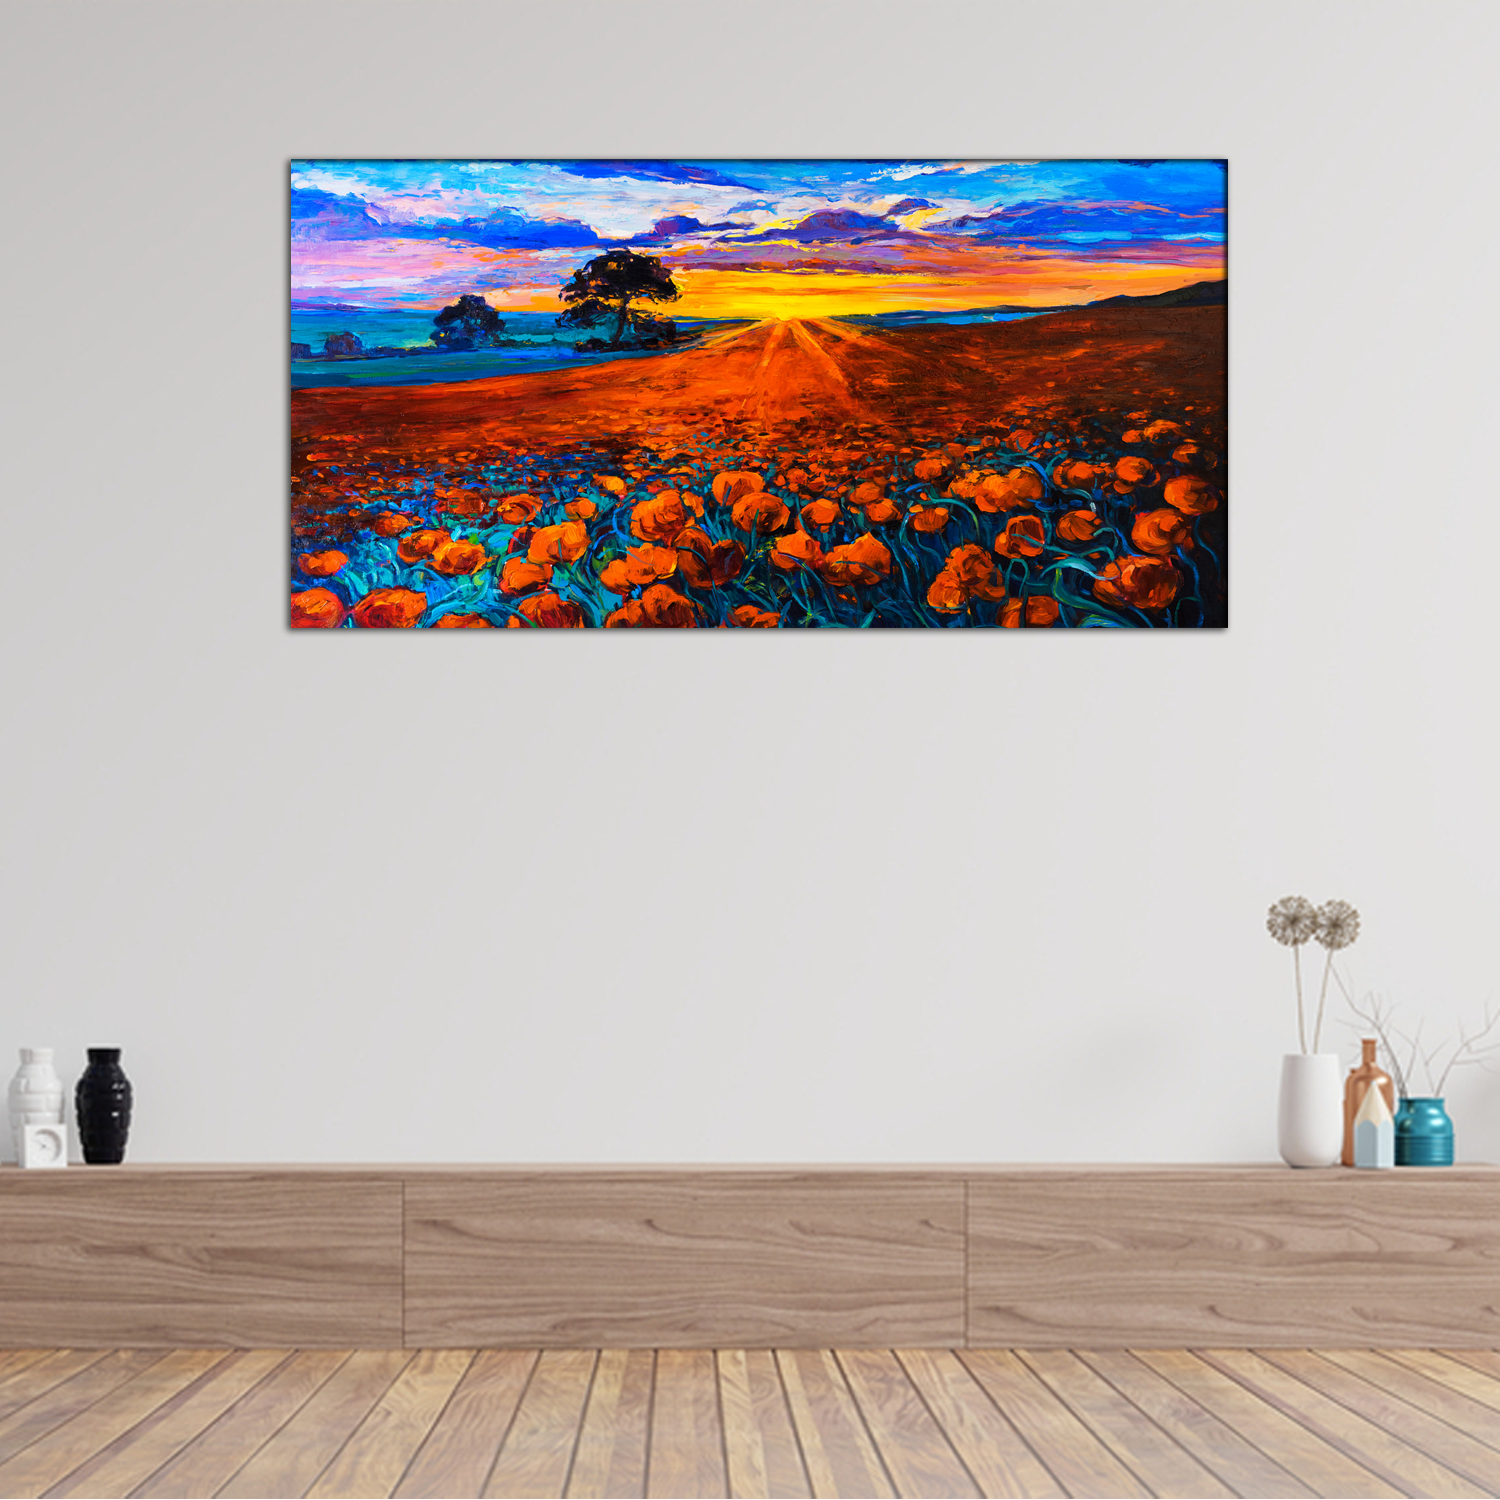 Poppy Field, Sunset Canvas Print Wall Painting